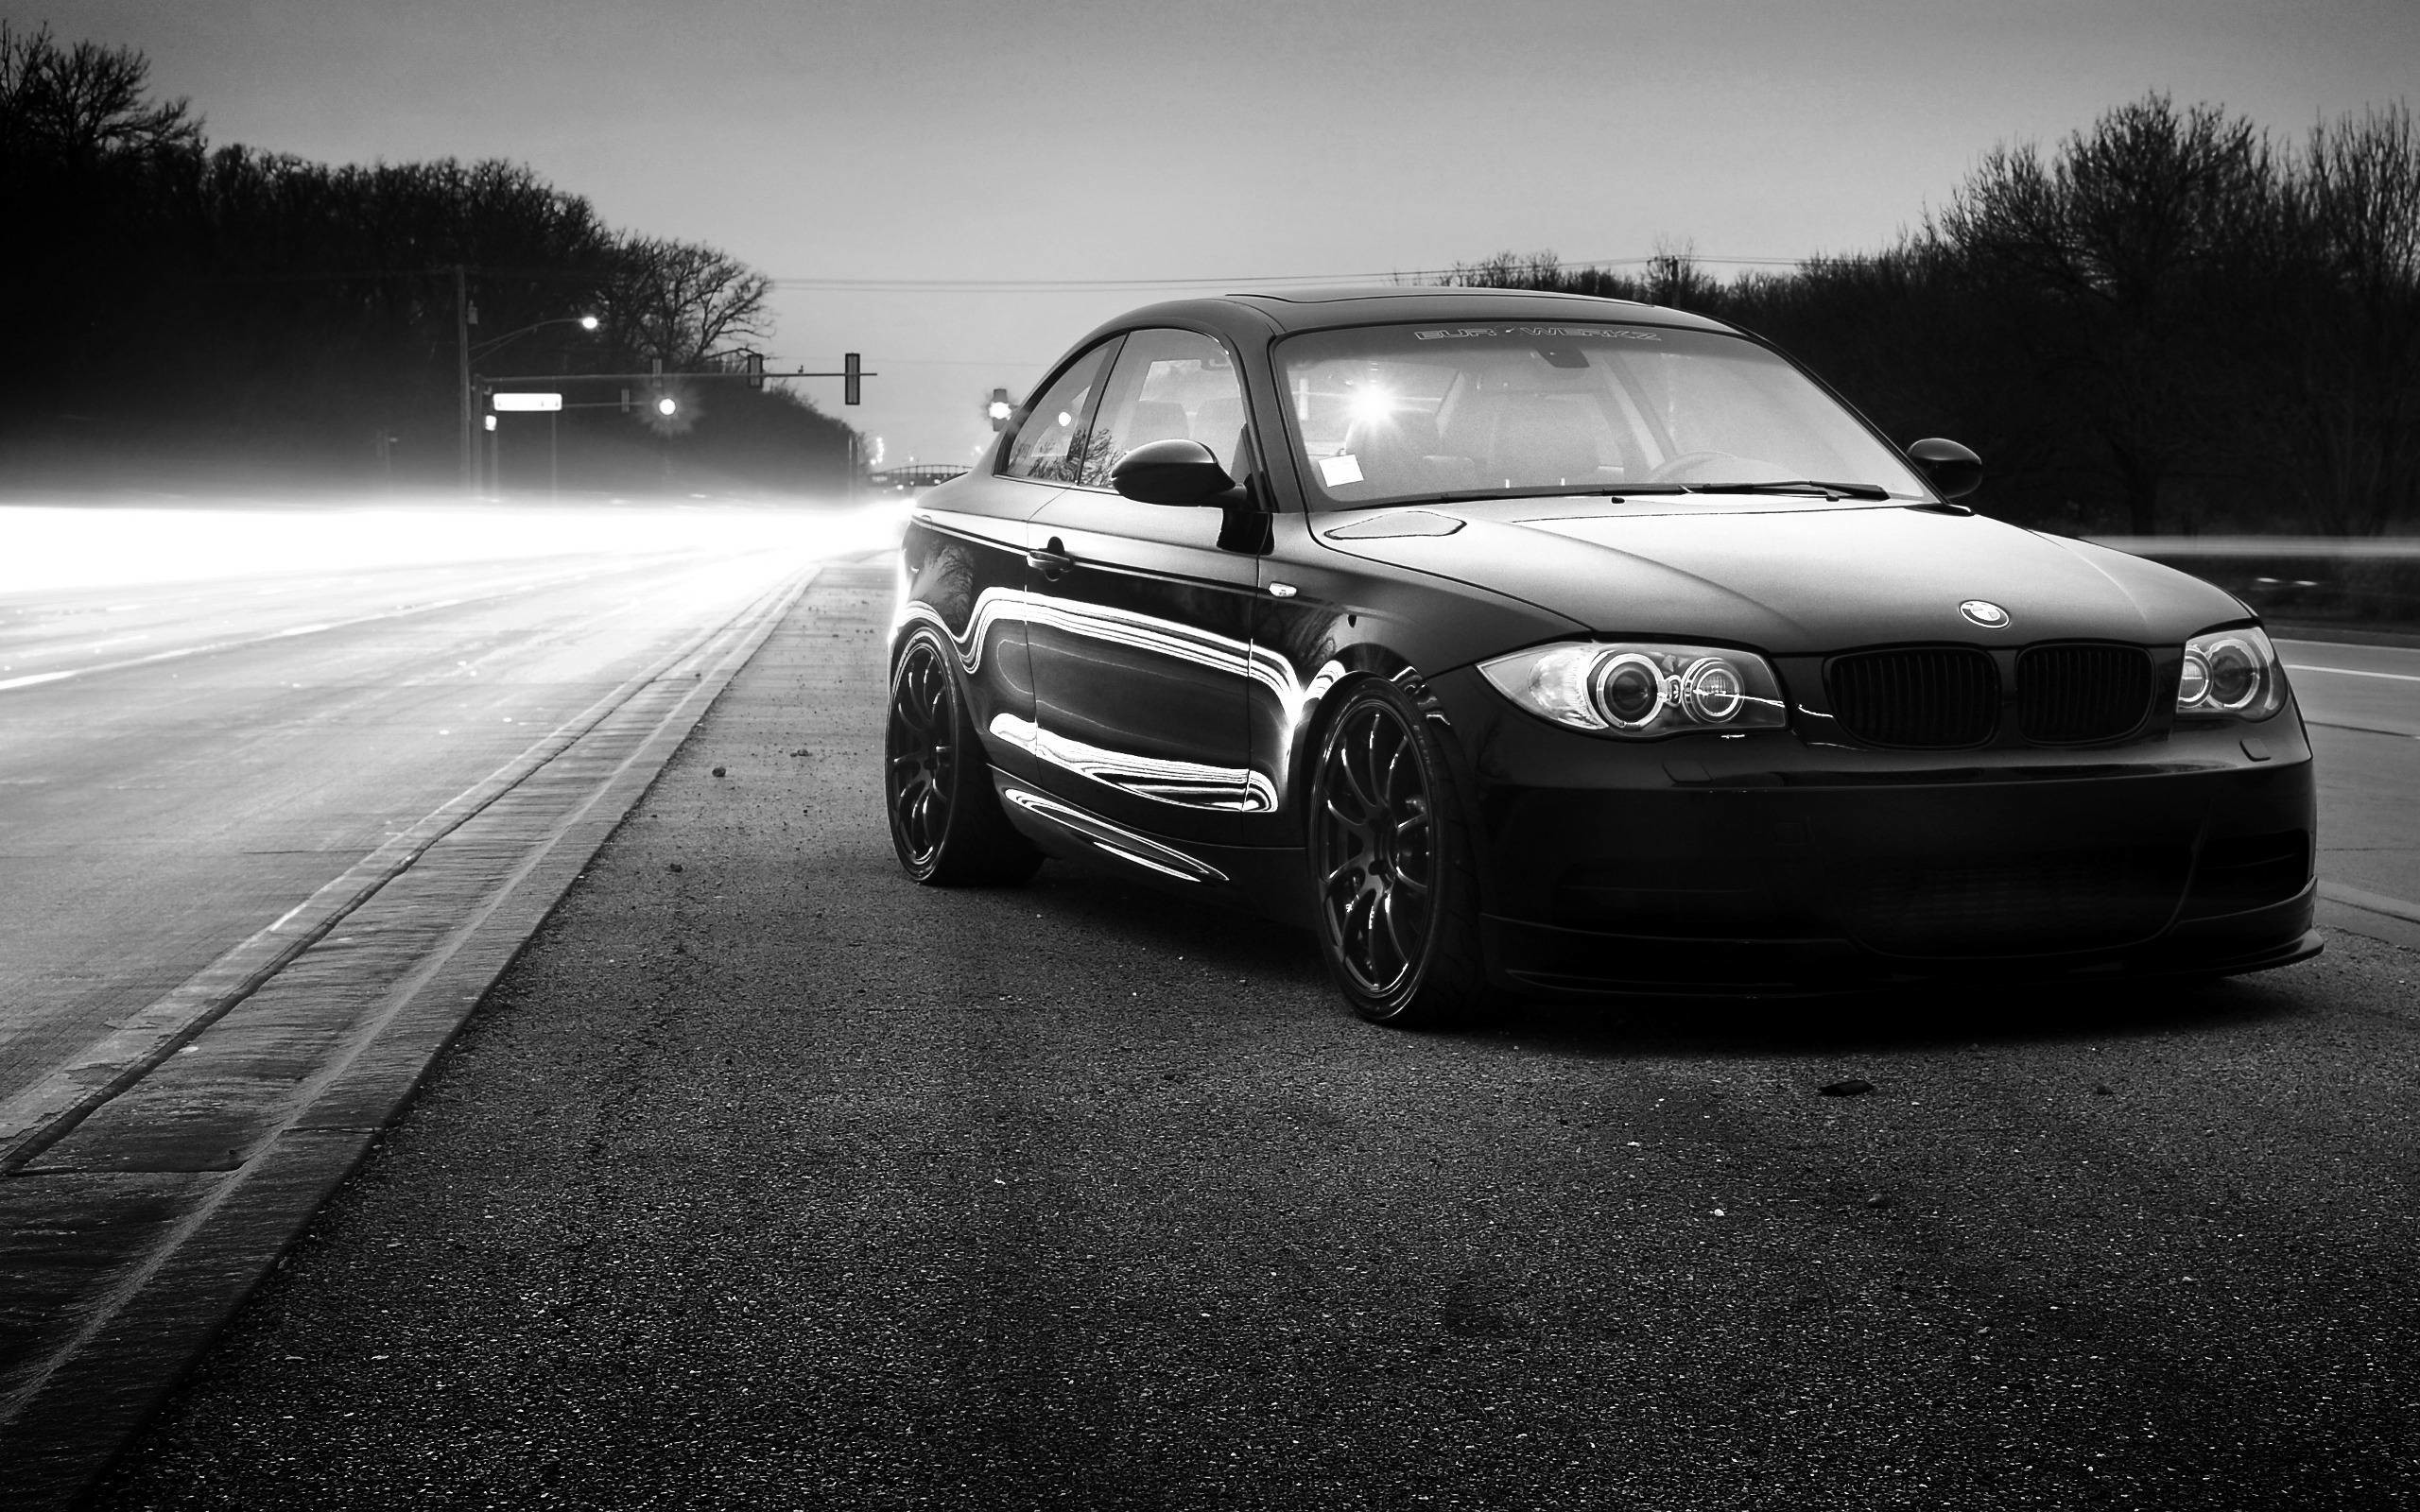 2560x1600 BMW 135i wallpapers and images - wallpapers, pictures, photos